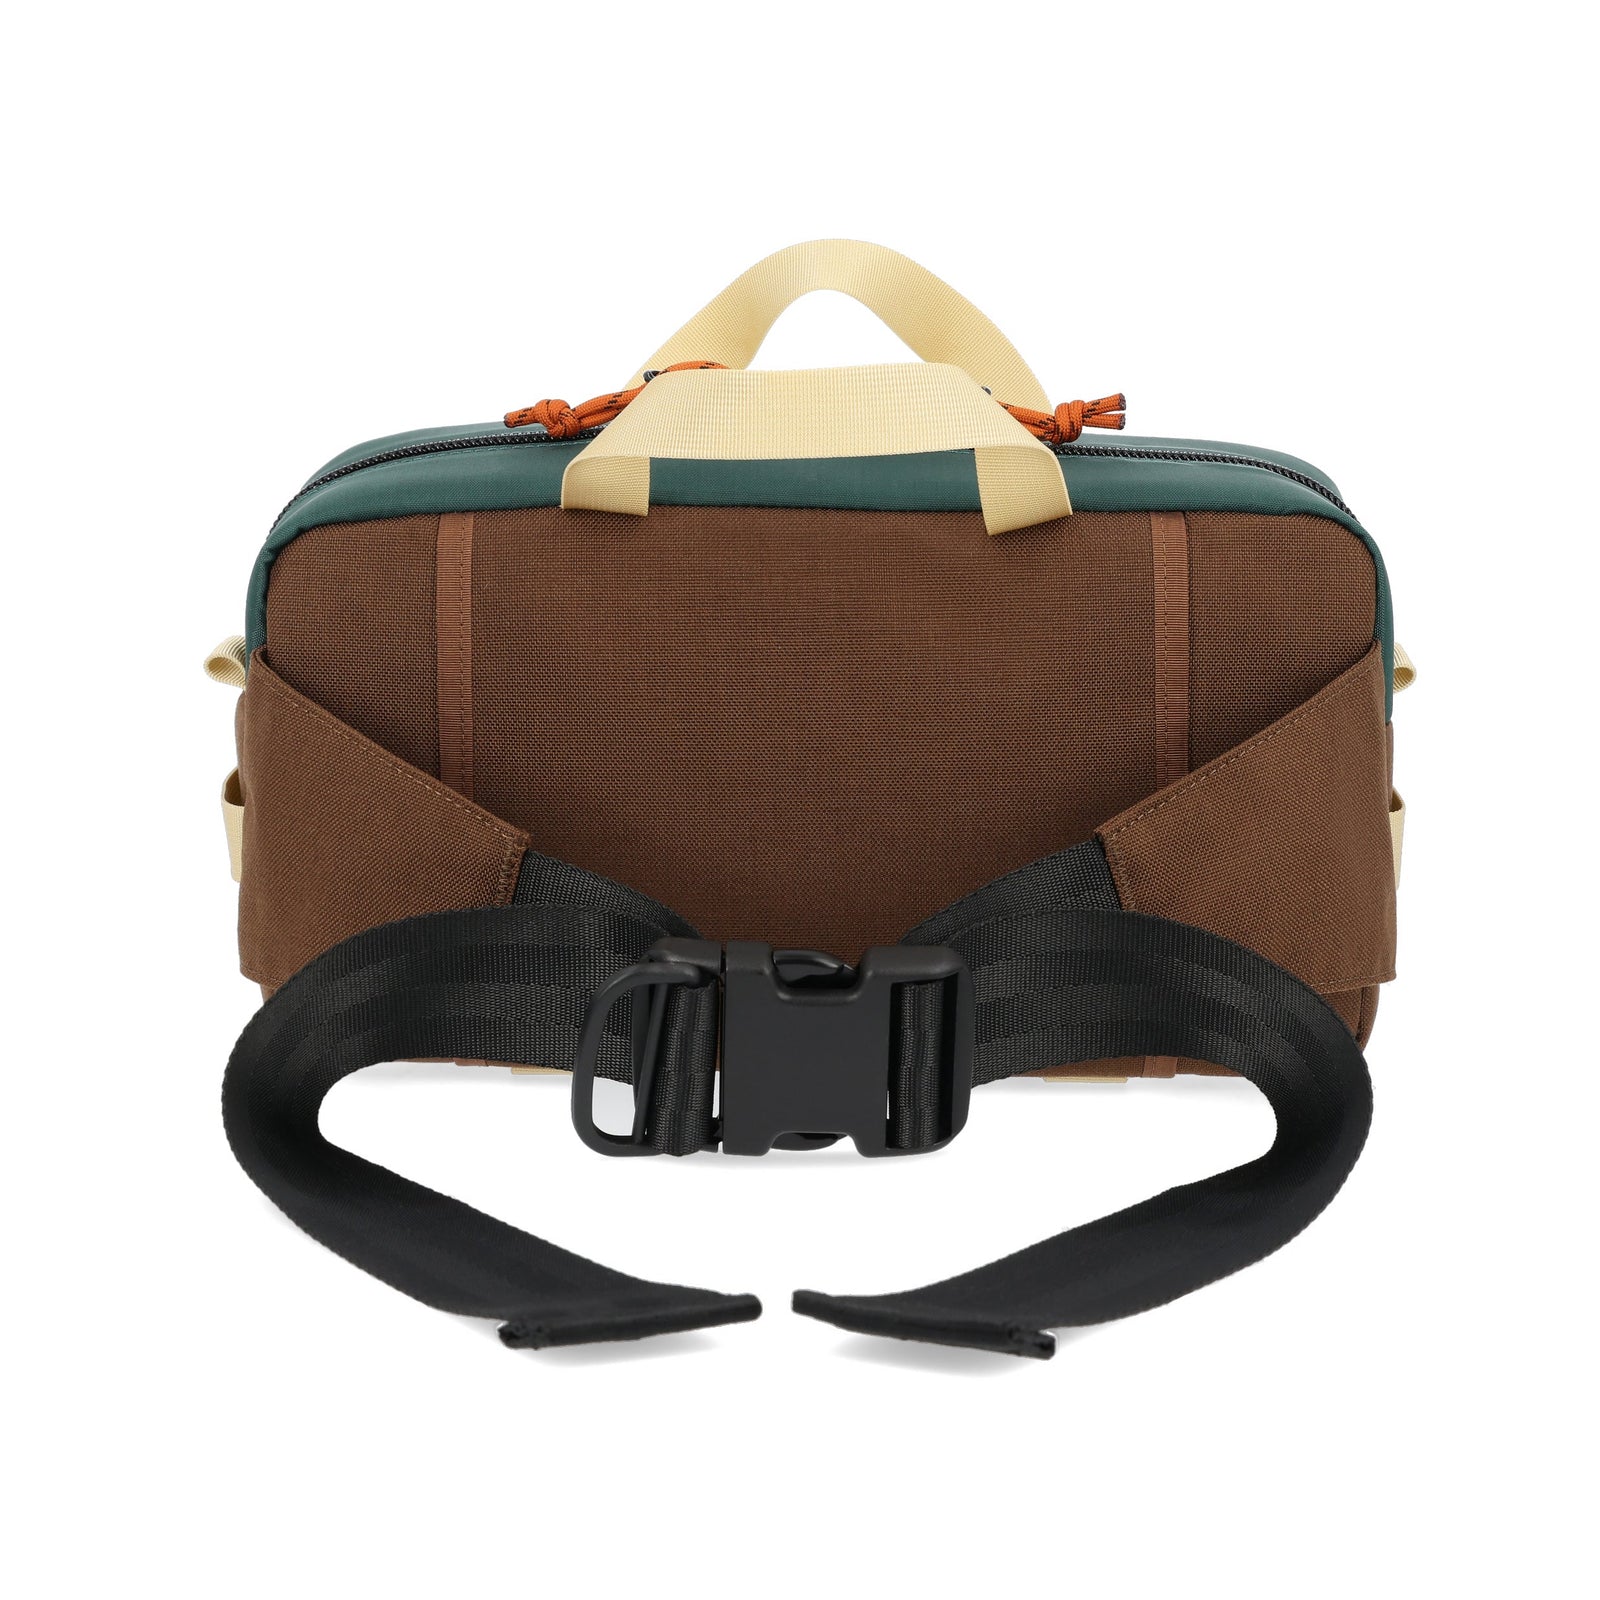 Back of Topo Designs Quick Pack hip fanny pack in "Forest / Cocoa" nylon.